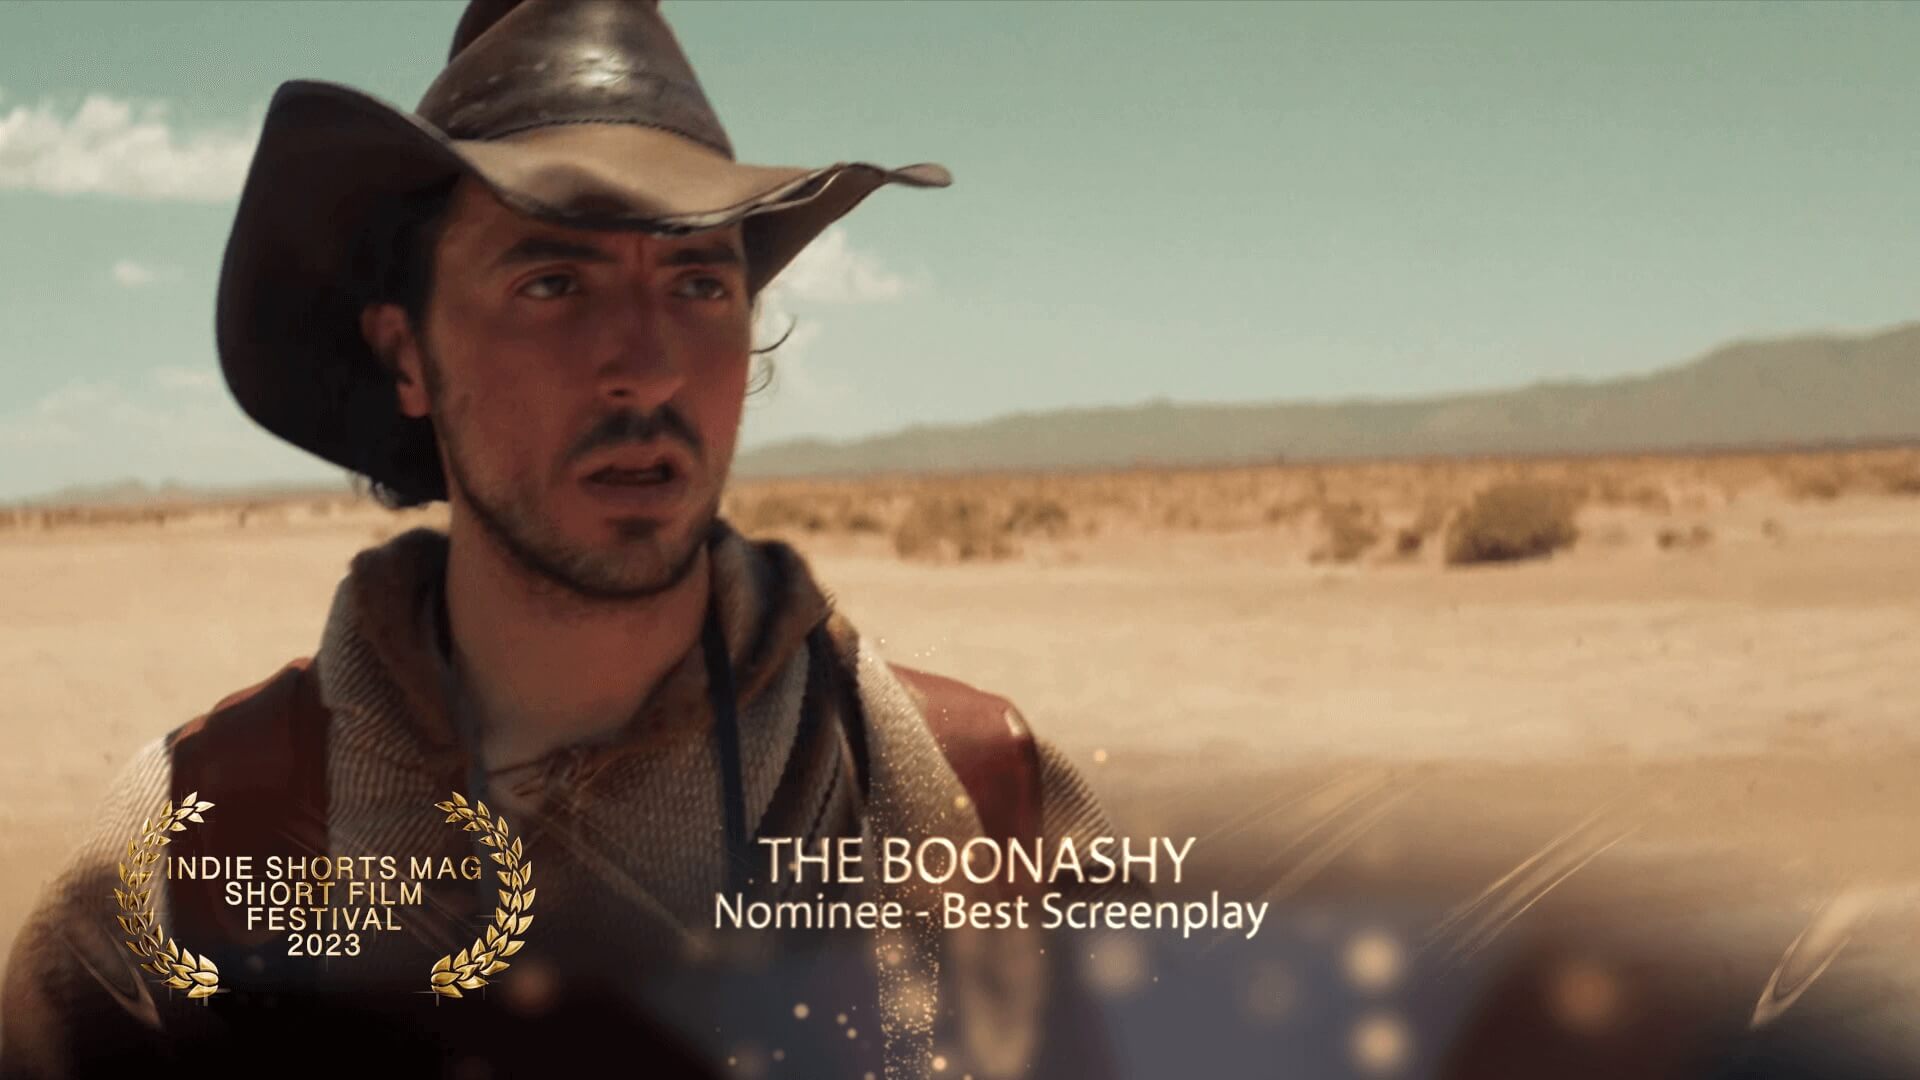 Indie Shorts Mag Short Film Festival - Best Screenplay - Nominee - The Boonashy